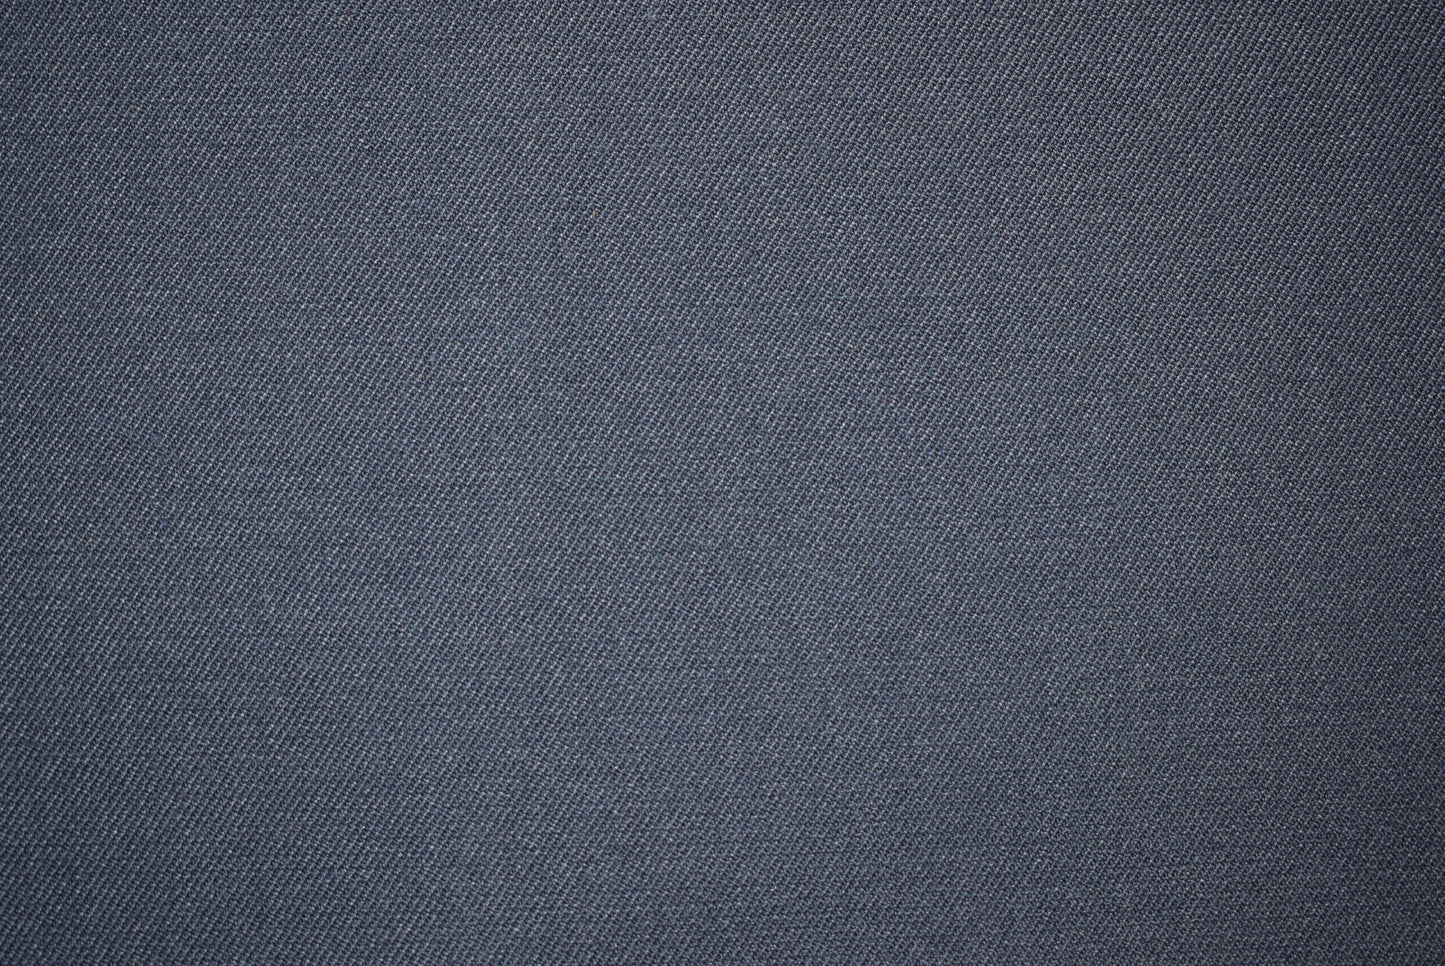 'Bamboo' Suiting - Squash